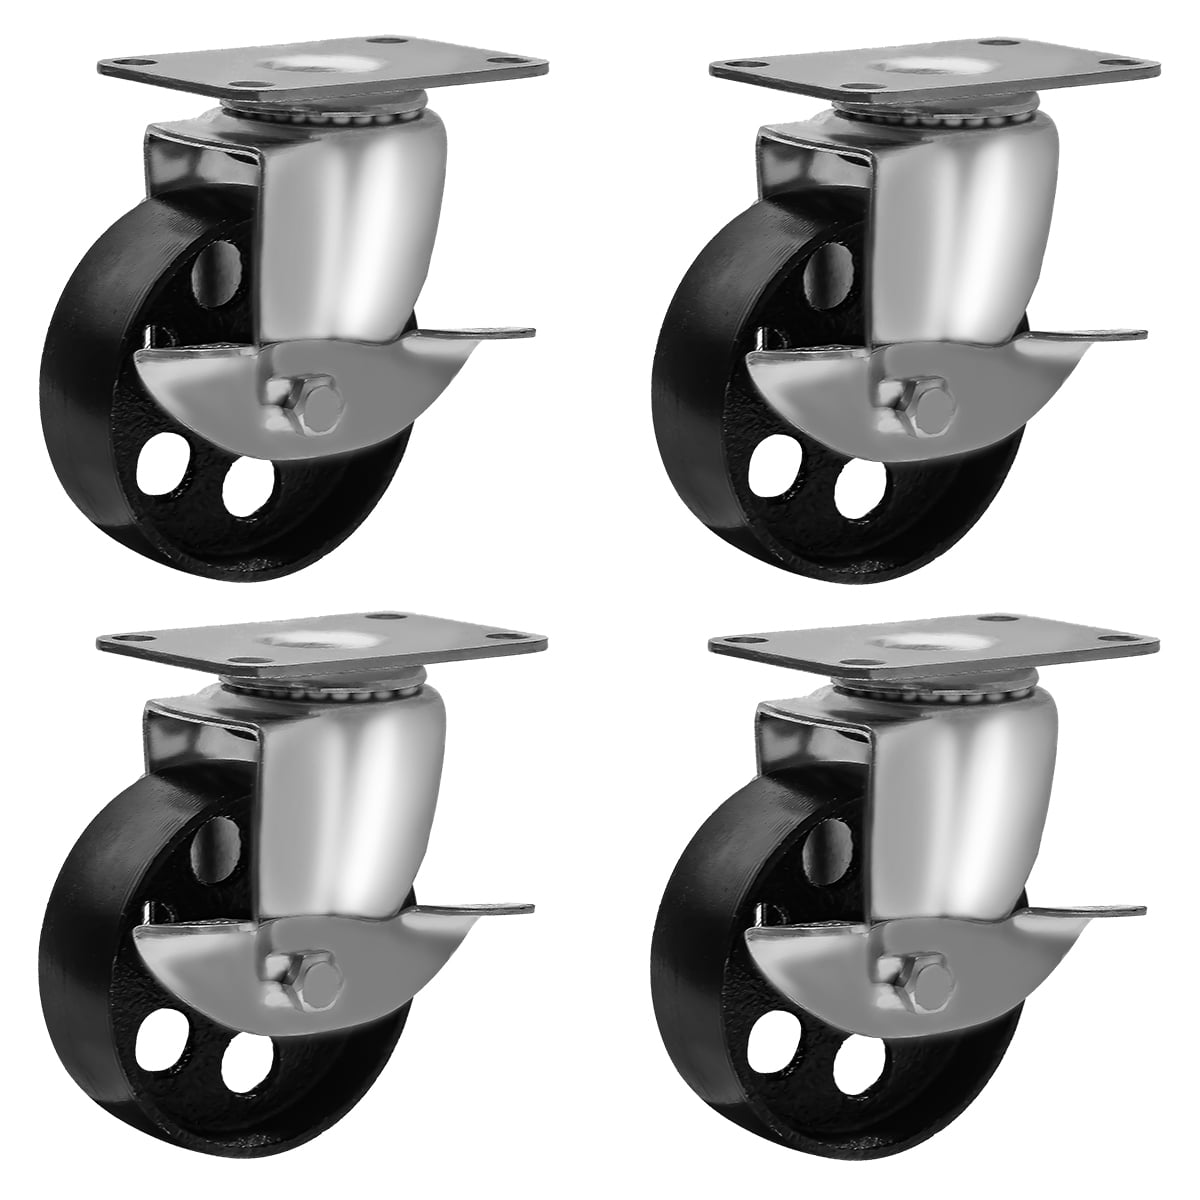 Lot of 4 All Steel Swivel Plate Casters and 2 with Brake Lock 3" Wheel 